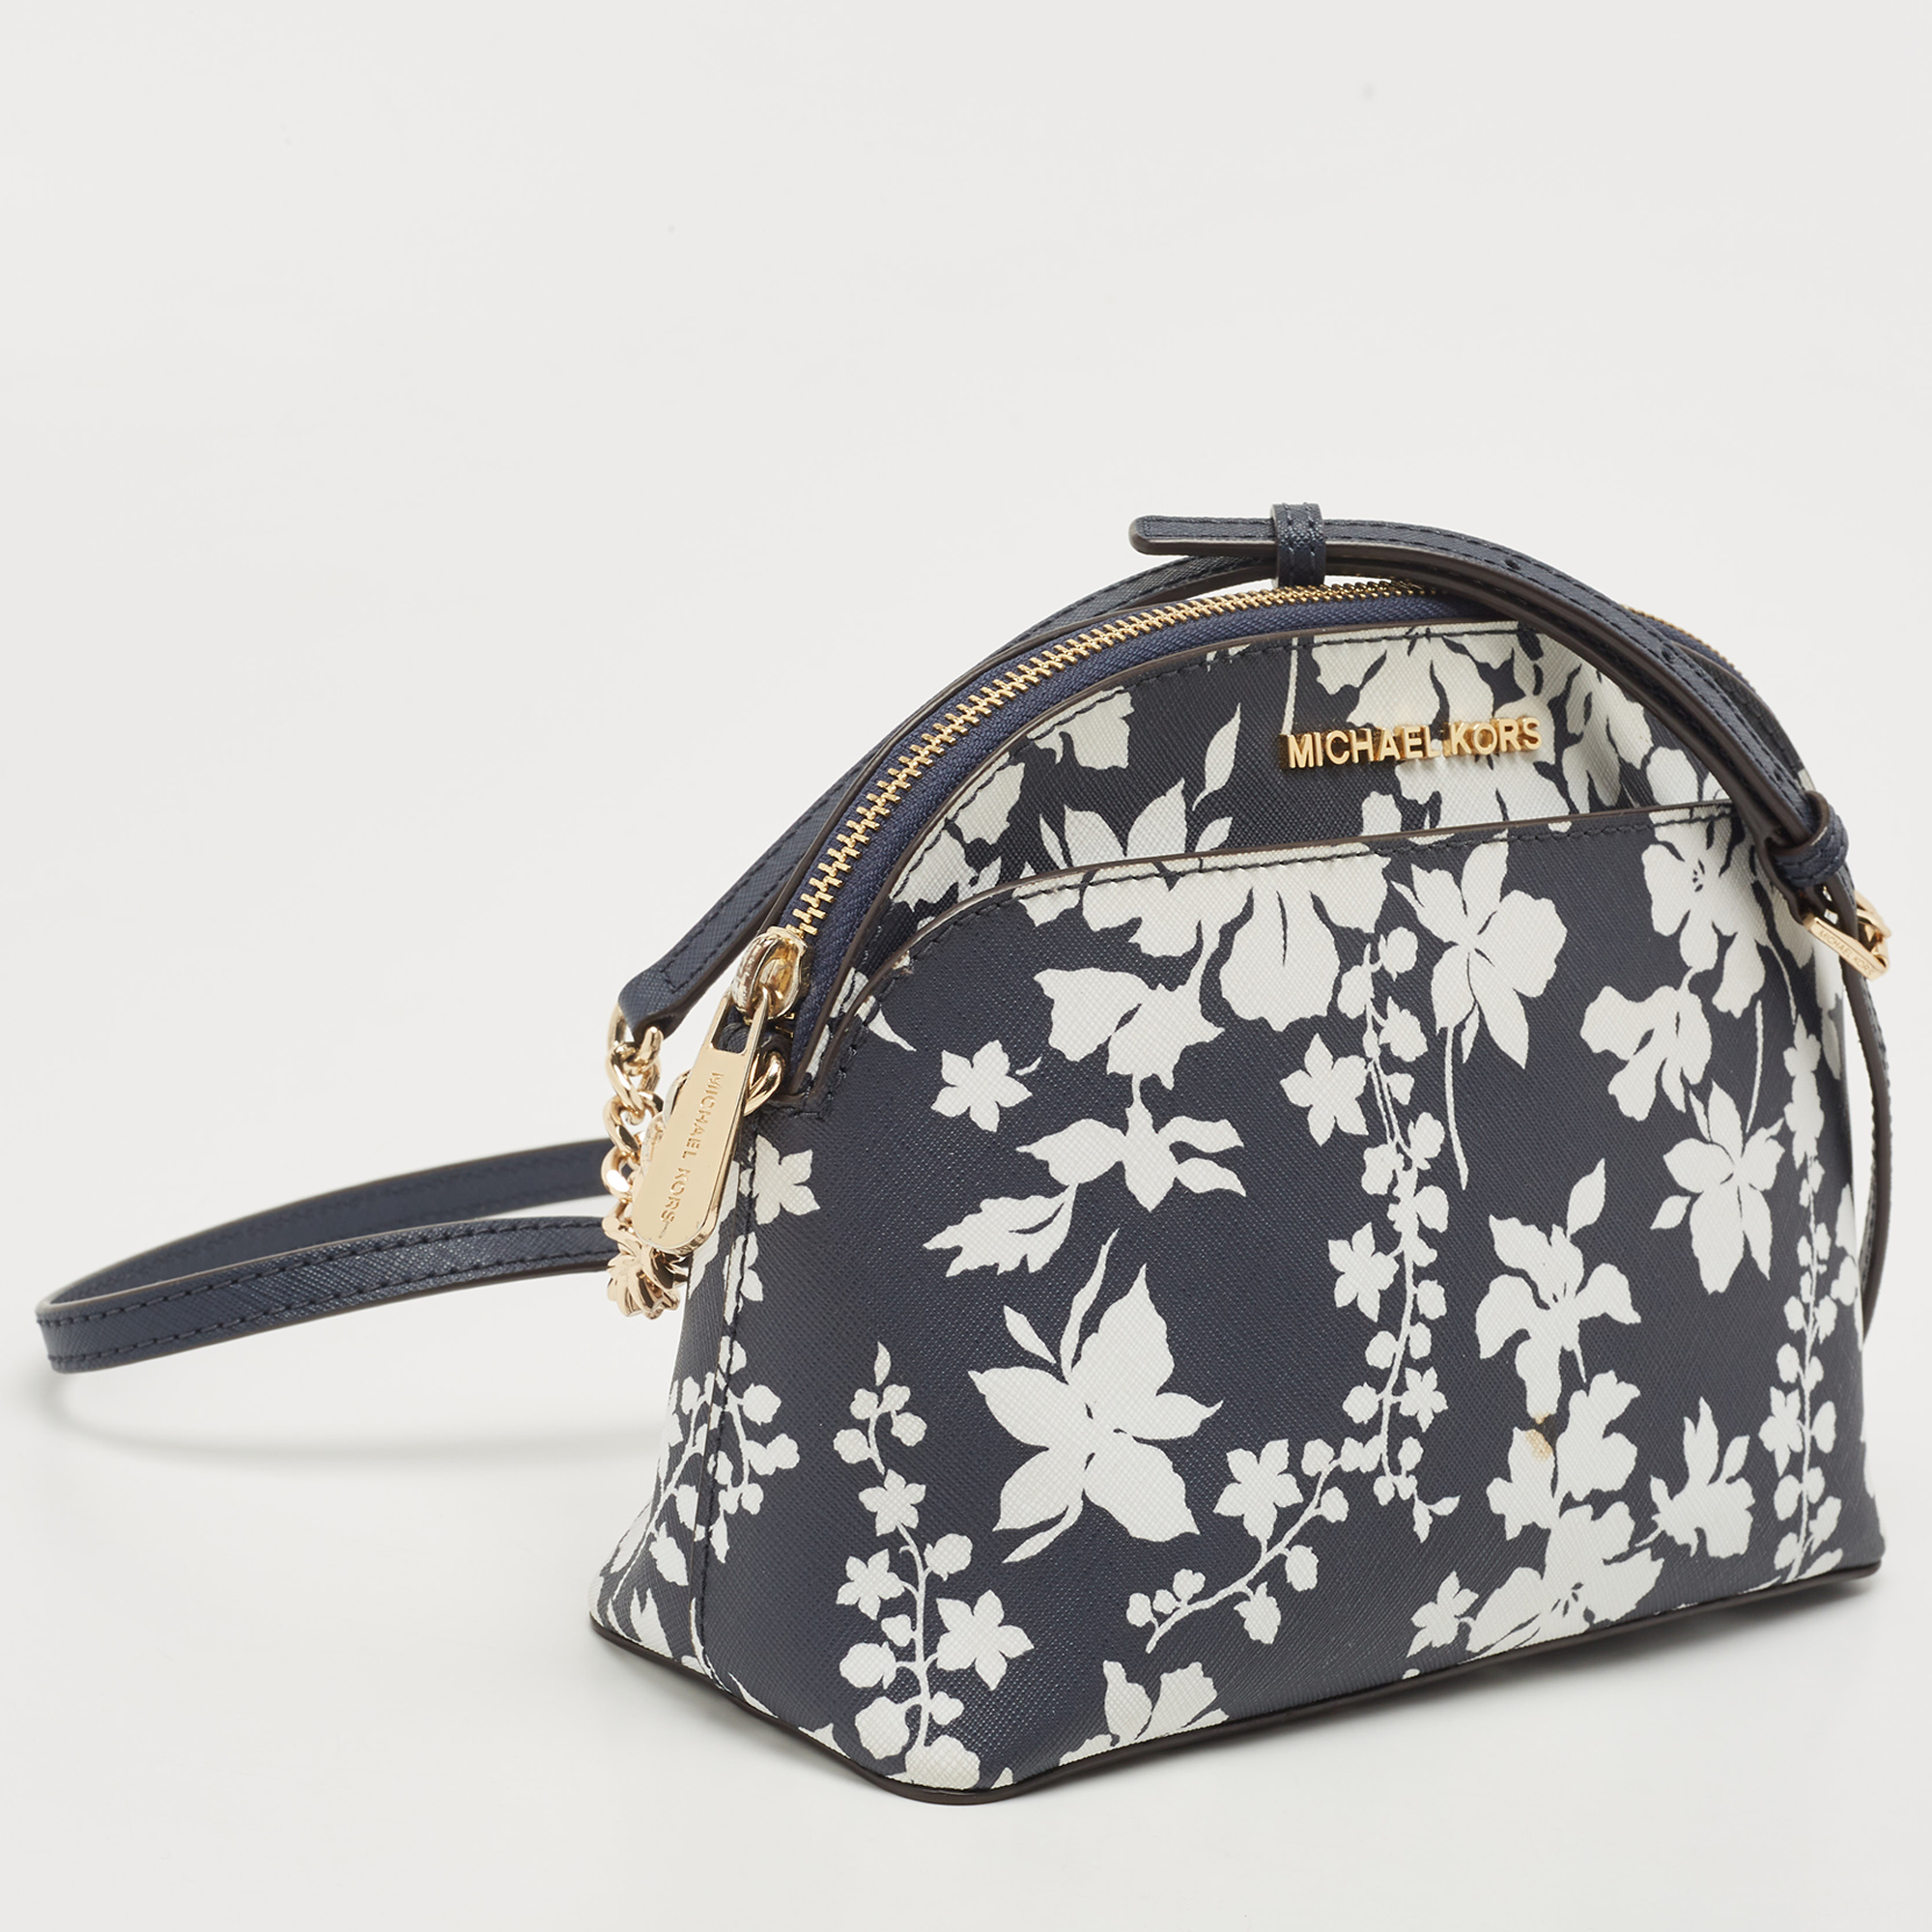 Michael Kors Navy Blue/White Leather Floral Dome Crossbody Bag